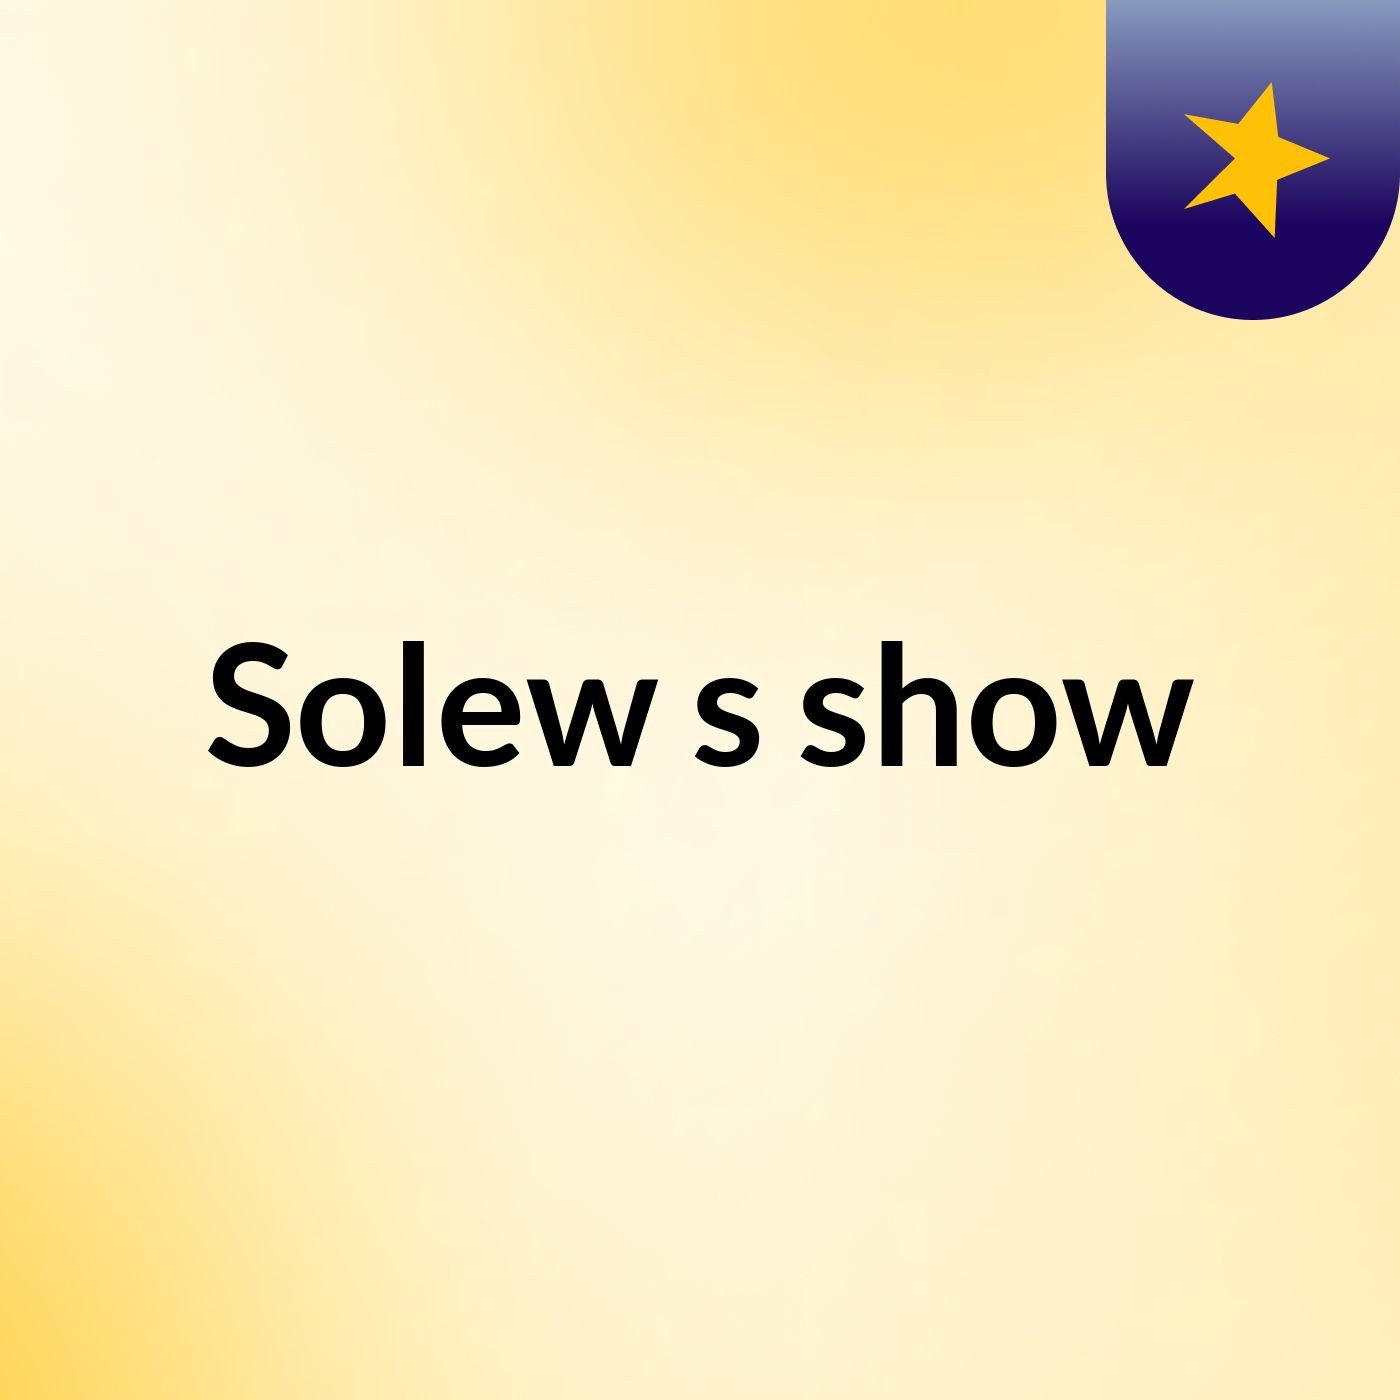 Solew's show